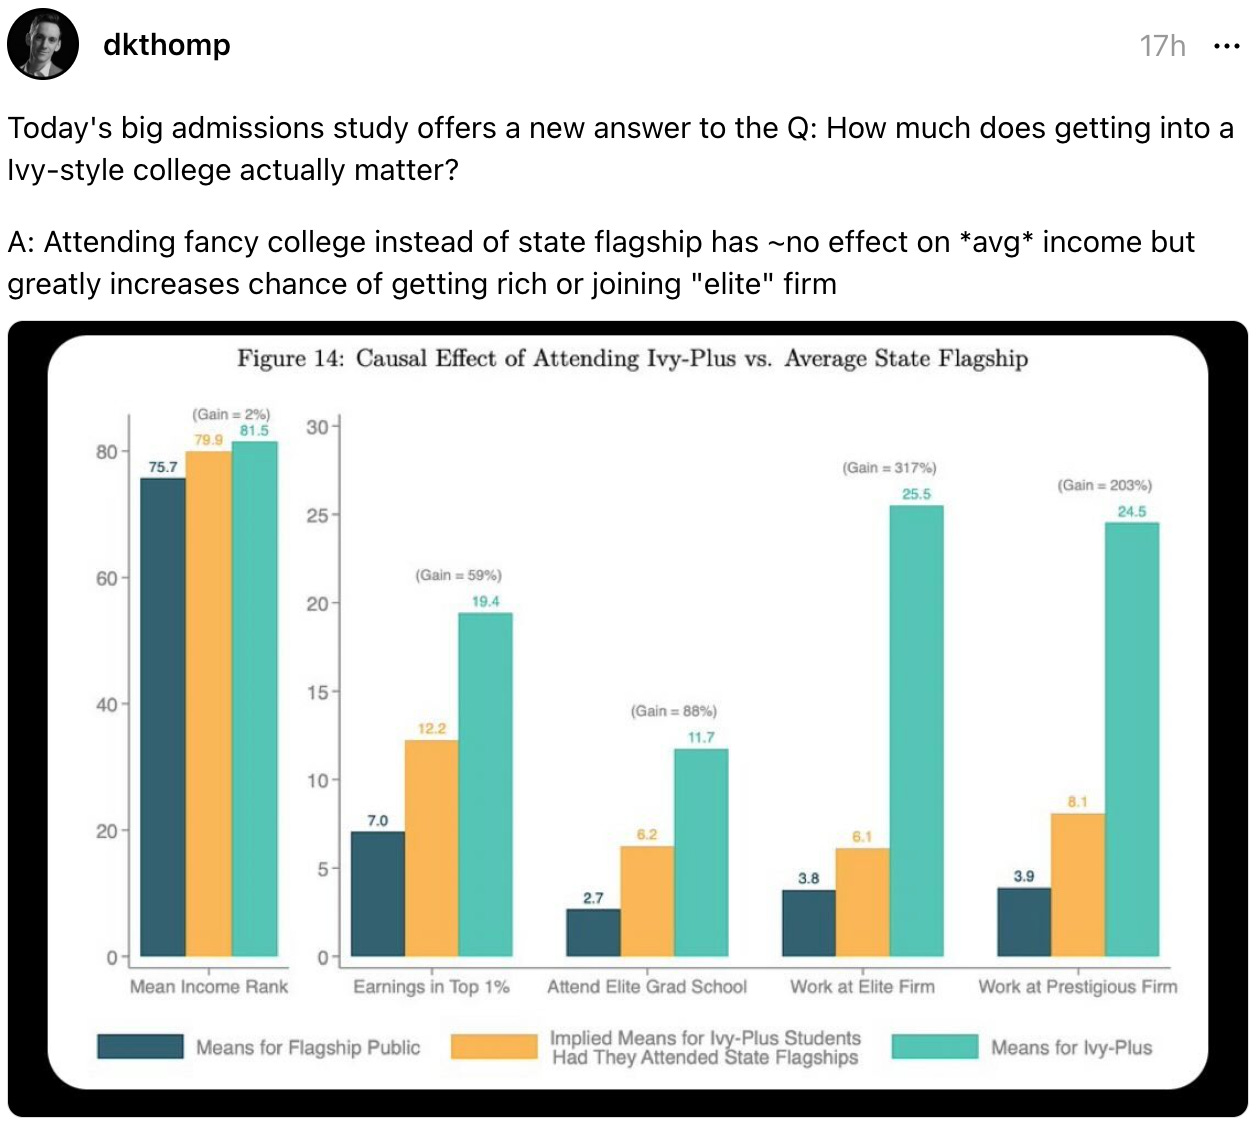 dkthomp 17h Today's big admissions study offers a new answer to the Q: How much does getting into a Ivy-style college actually matter?  A: Attending fancy college instead of state flagship has ~no effect on *avg* income but greatly increases chance of getting rich or joining "elite" firm